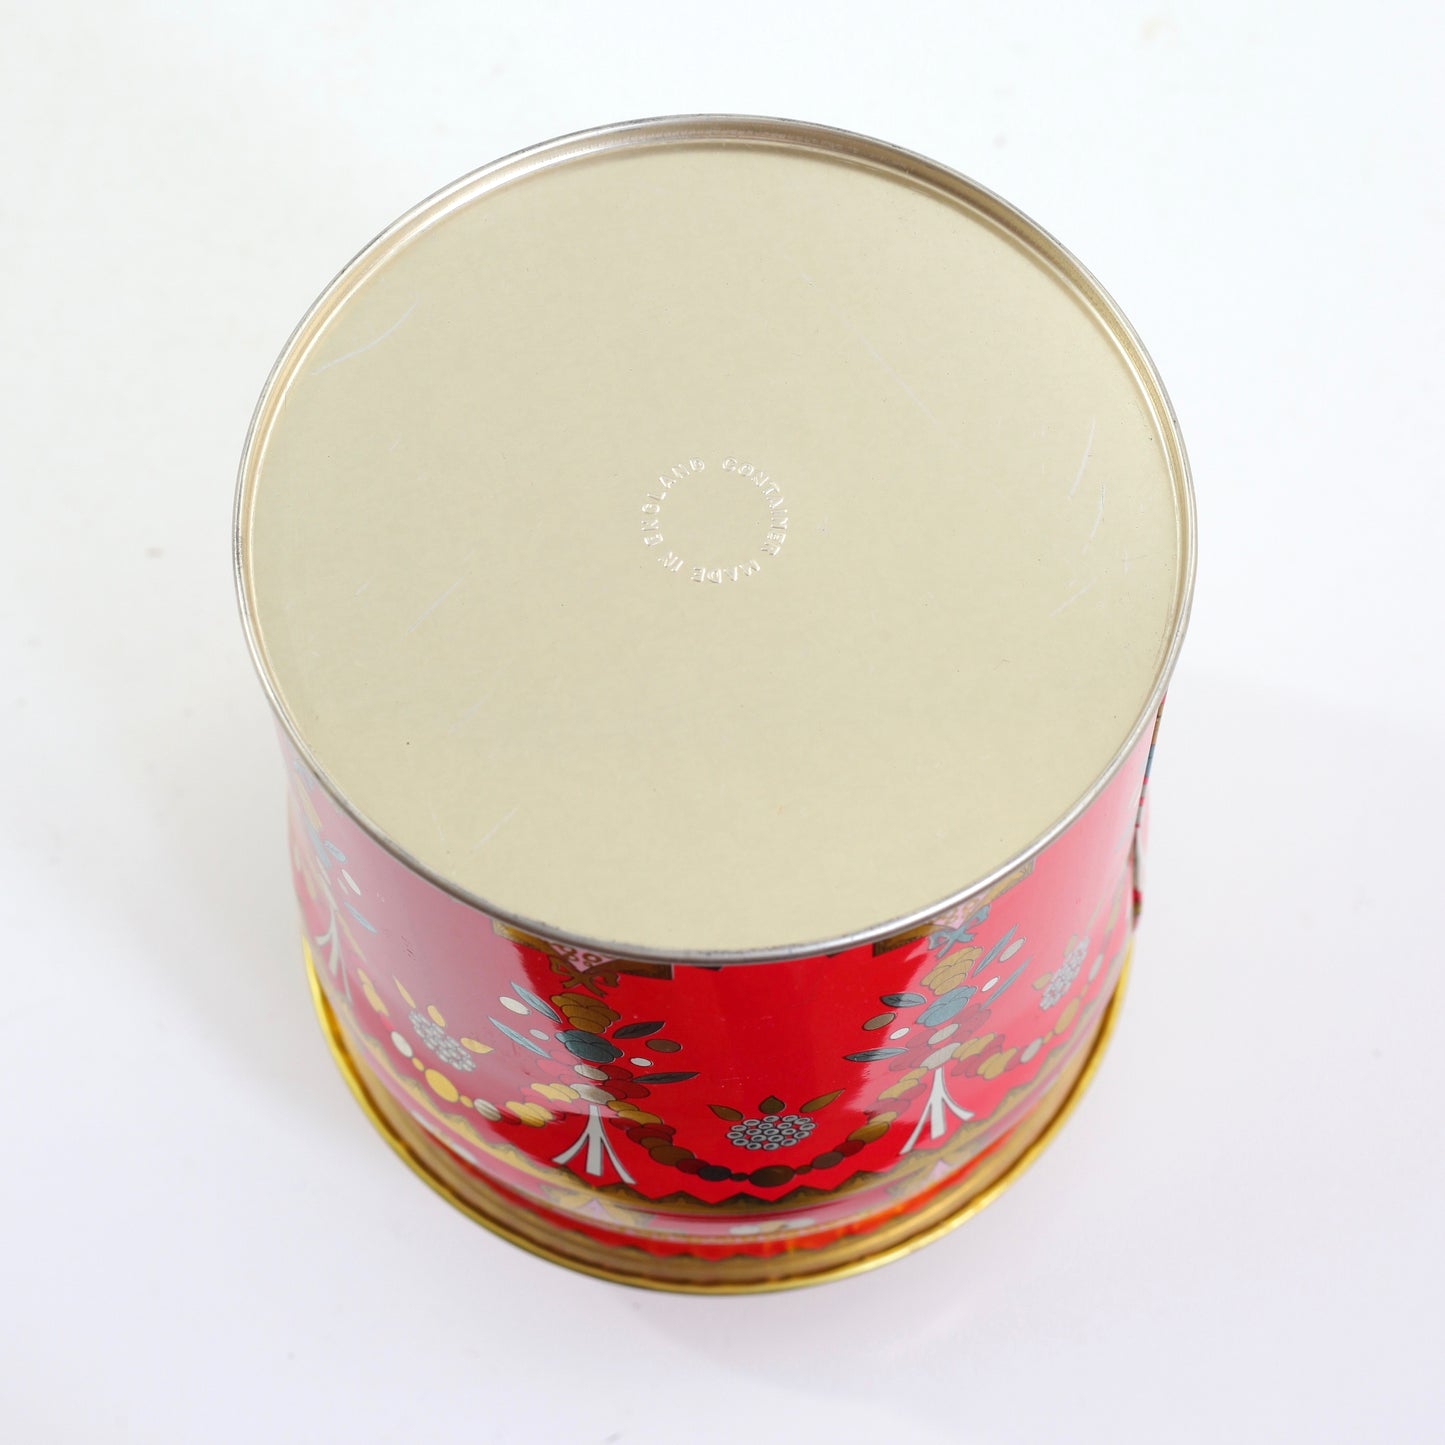 SOLD - Vintage Red Floral Tin from England